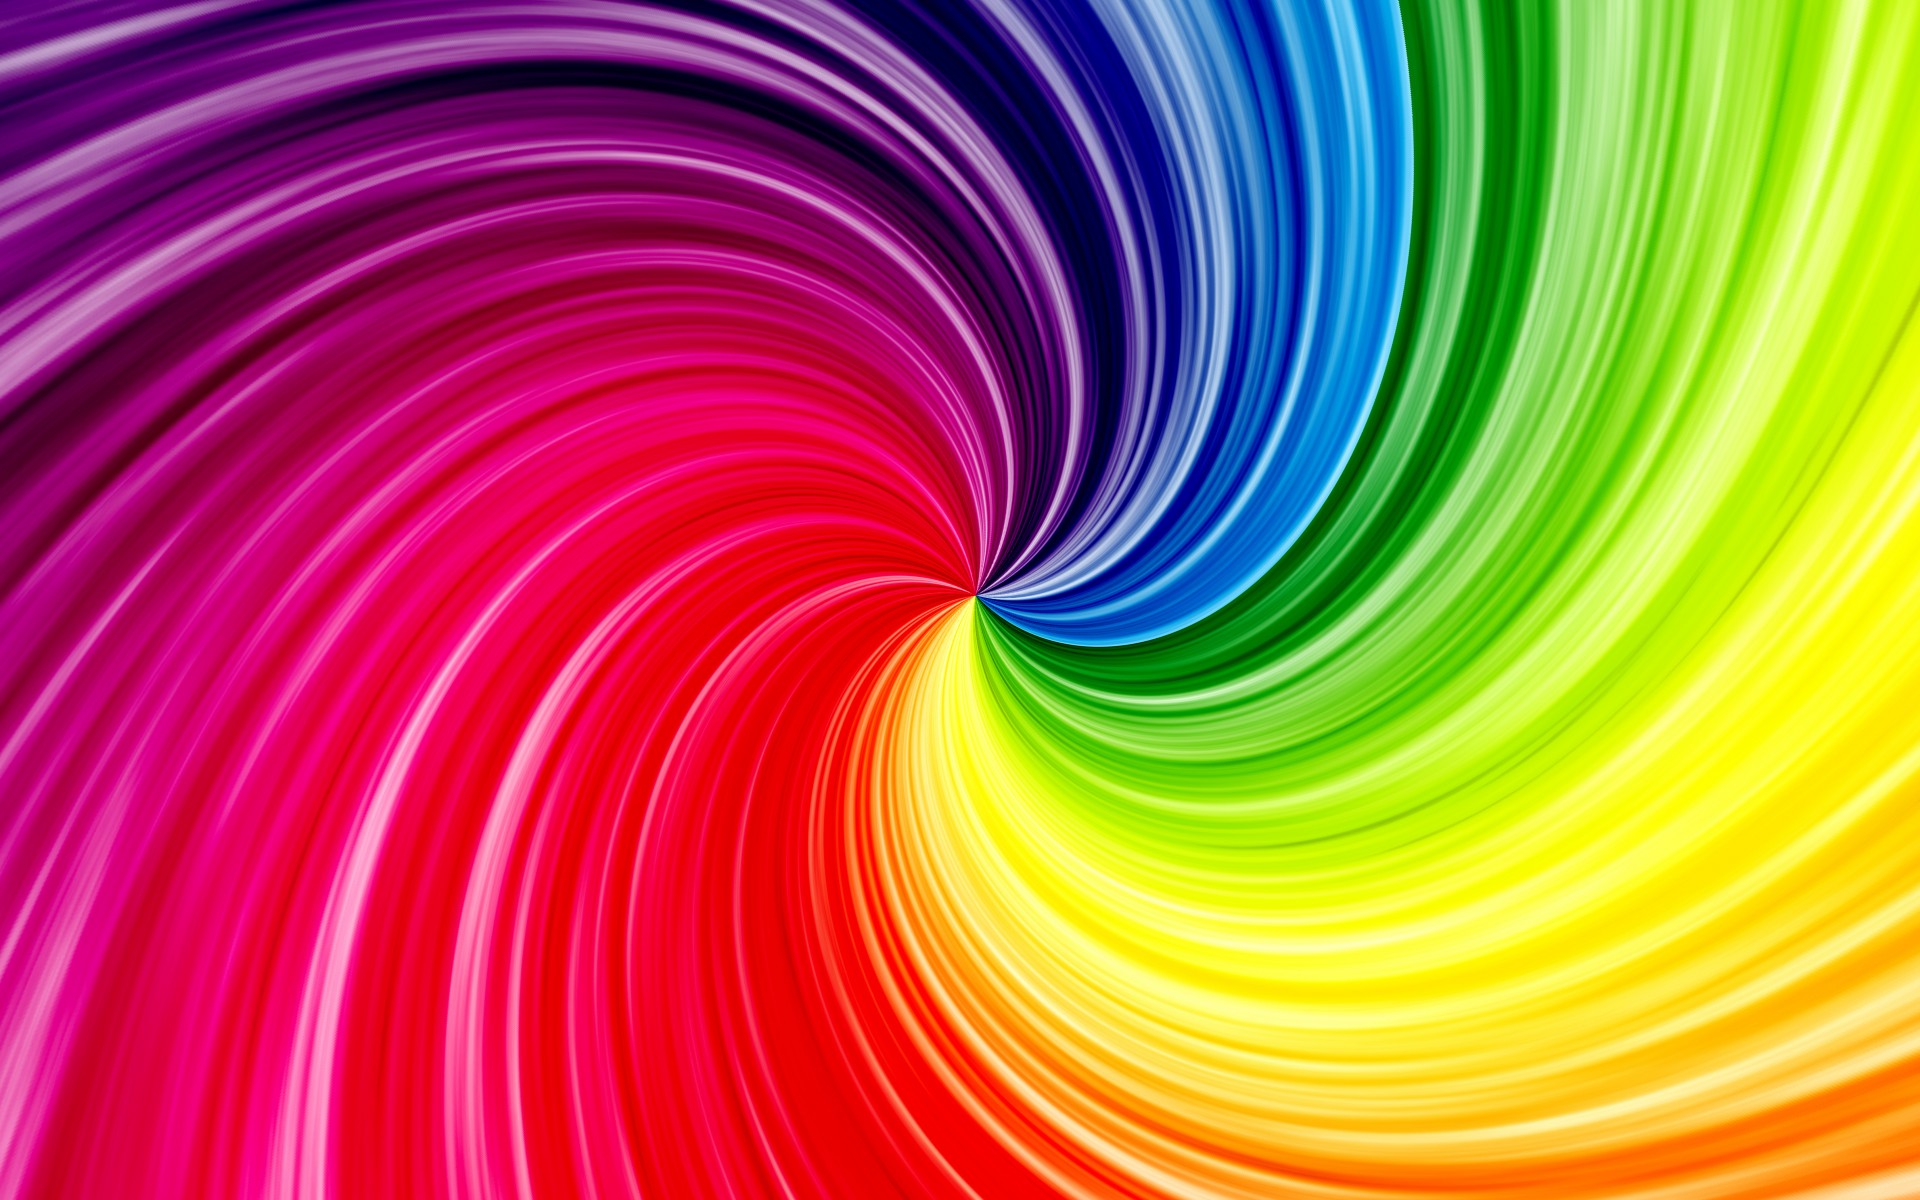 Bright colorful waves f wallpaper 1920x1200 100972 WallpaperUP